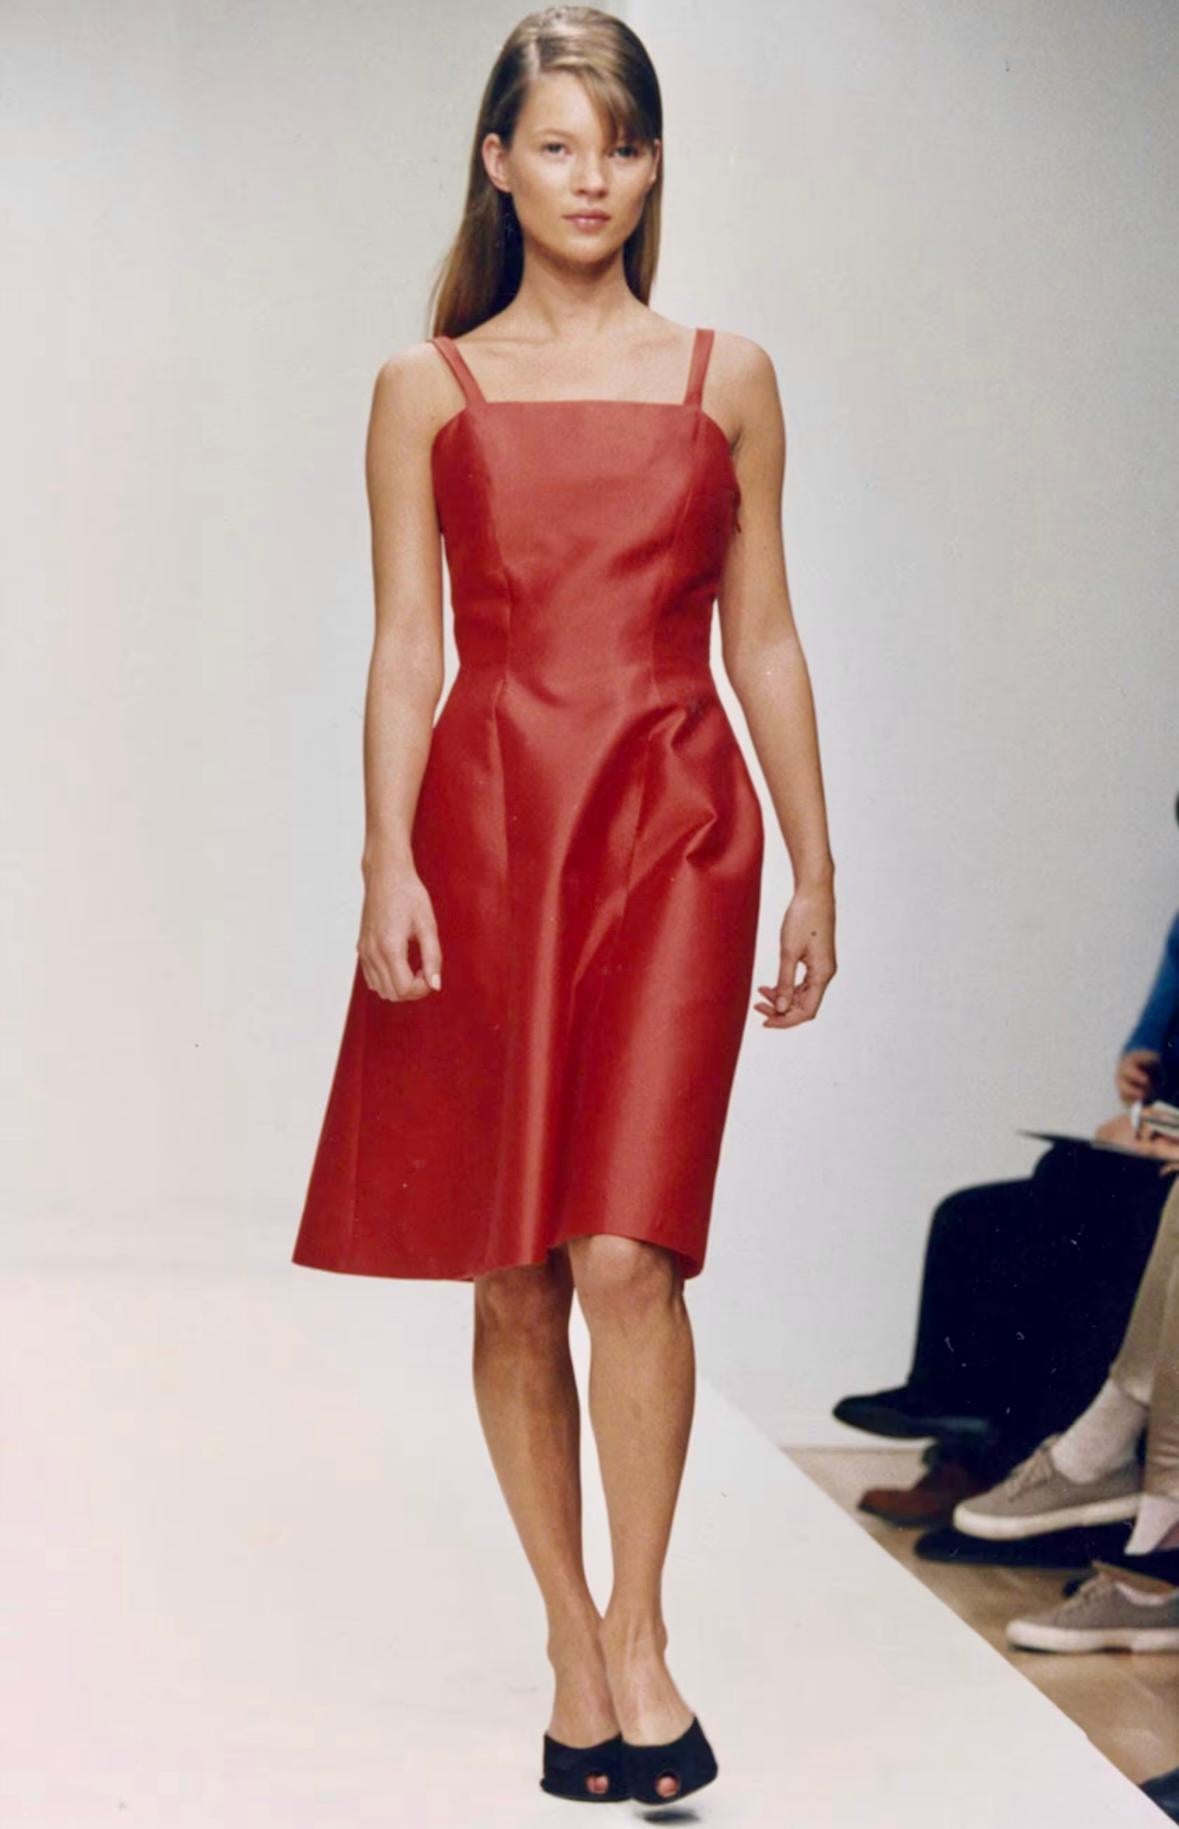 Kate Moss modeled this fabulous red Prada mini dress on the brand's Fall/Winter 1995 runway as look 53. Constructed of a silk/wool taffeta, this sleek mini dress features thin straps, a square neckline, and a flared skirt. Effortlessly chic and